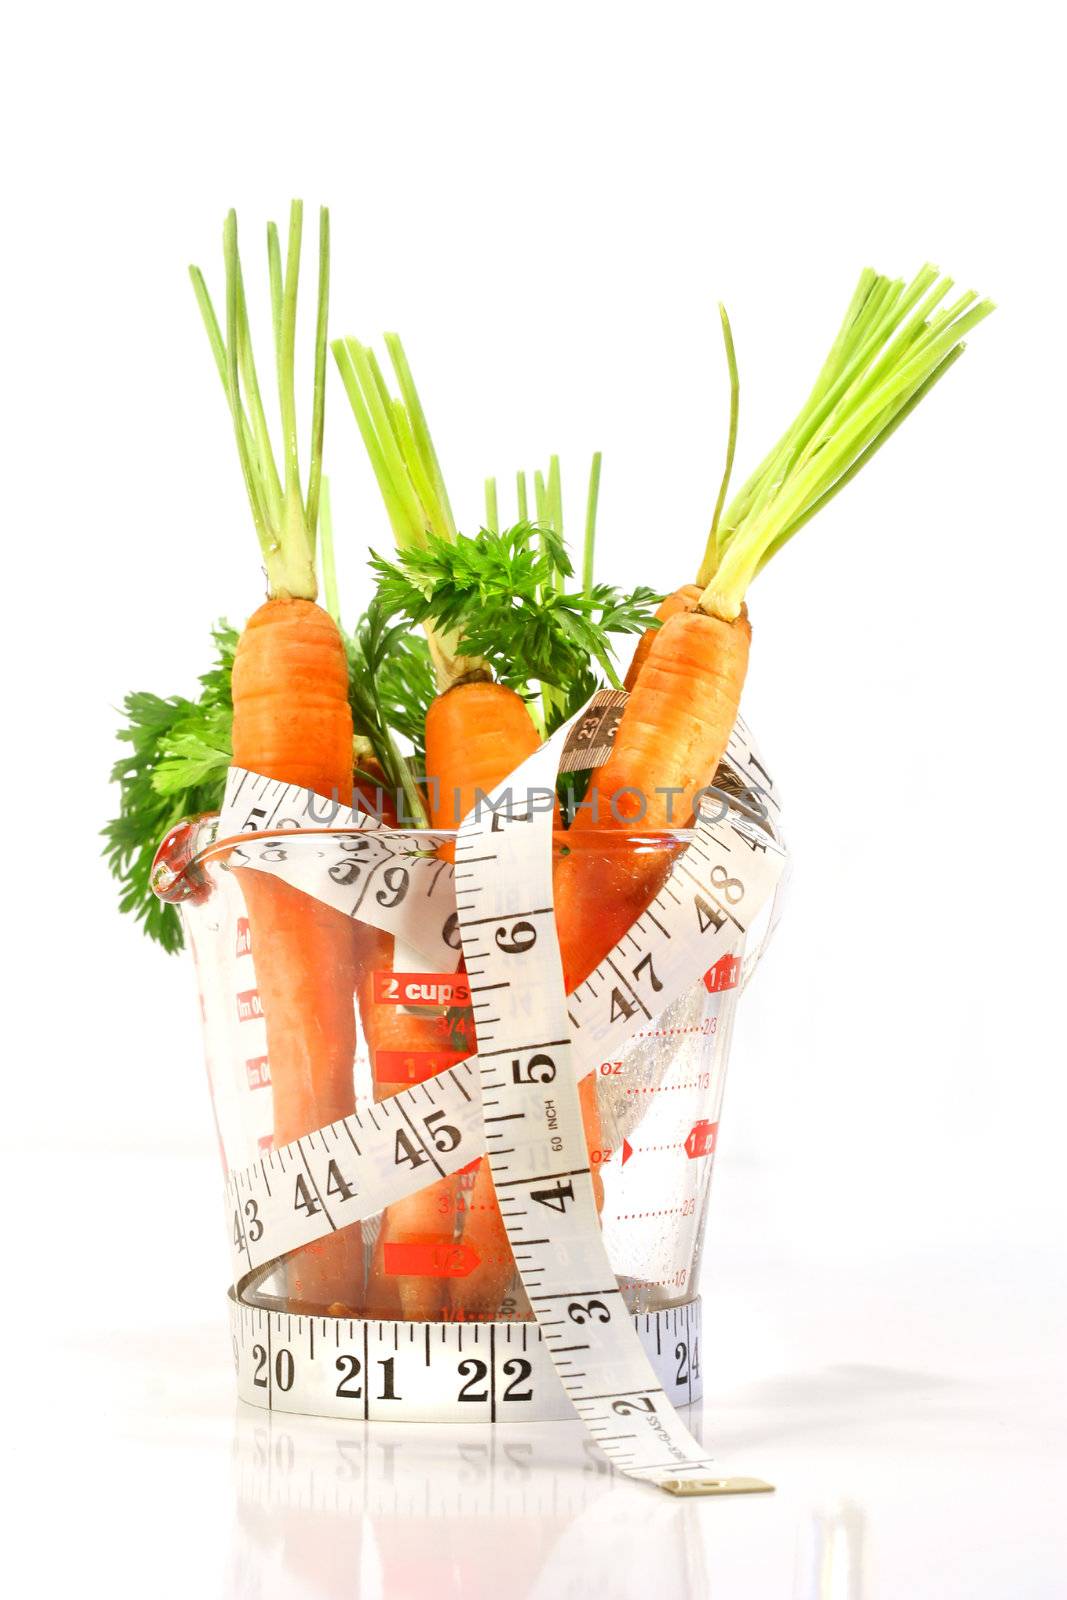 Carrots in a measuring cup with tape measure by Sandralise